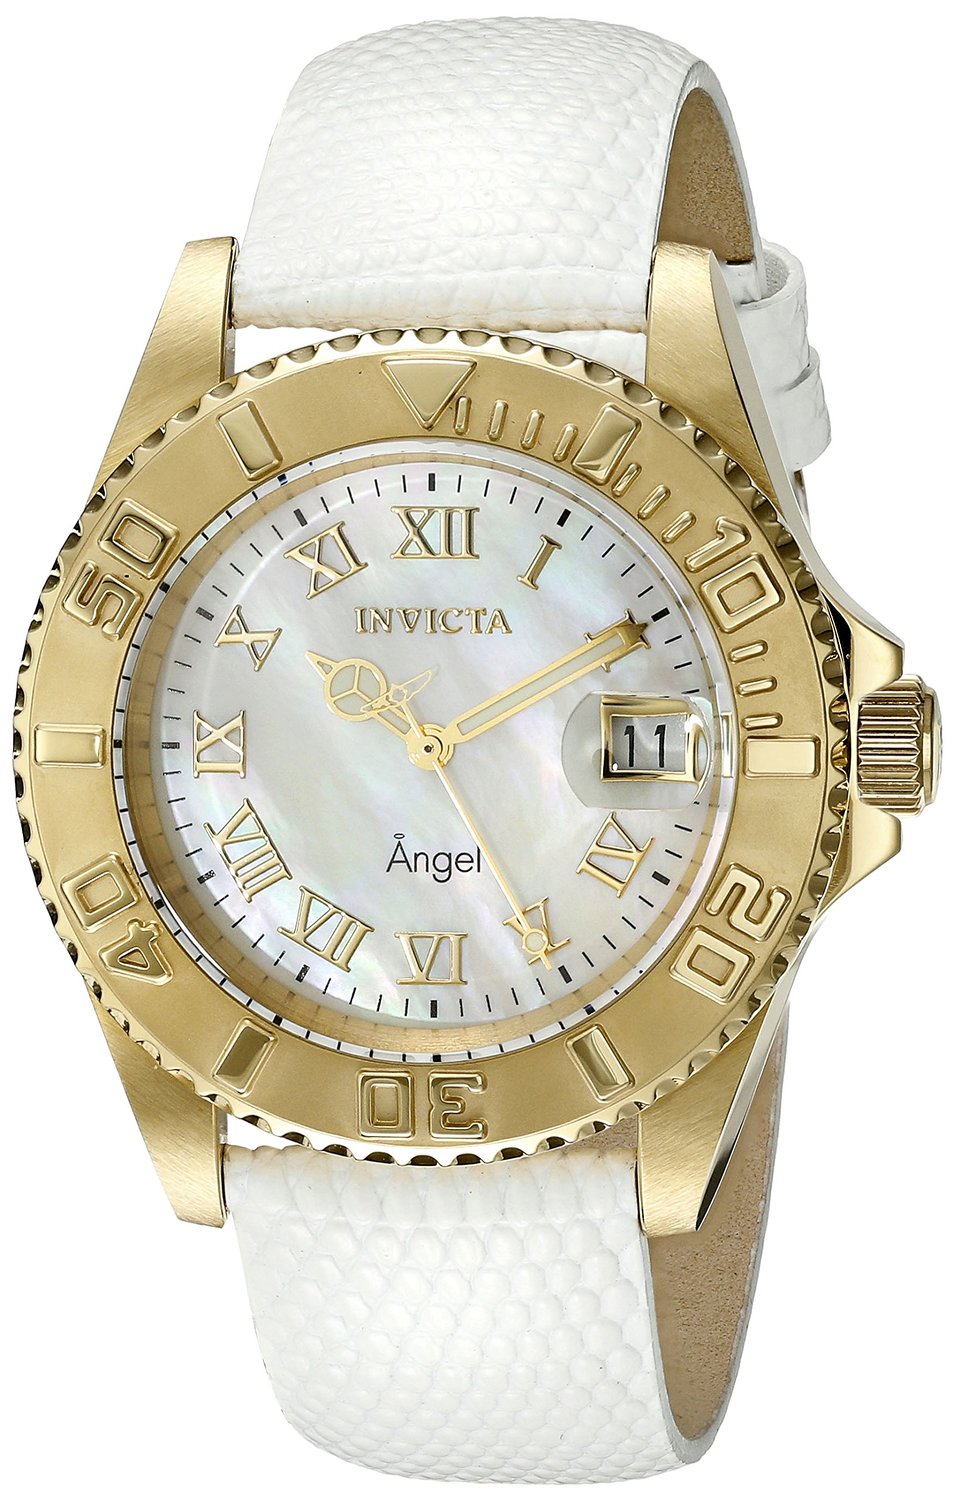 Invicta Angel Mother Of Pearl Dial Date Display 18415 Women’s Watch.jpg  by creationwatches